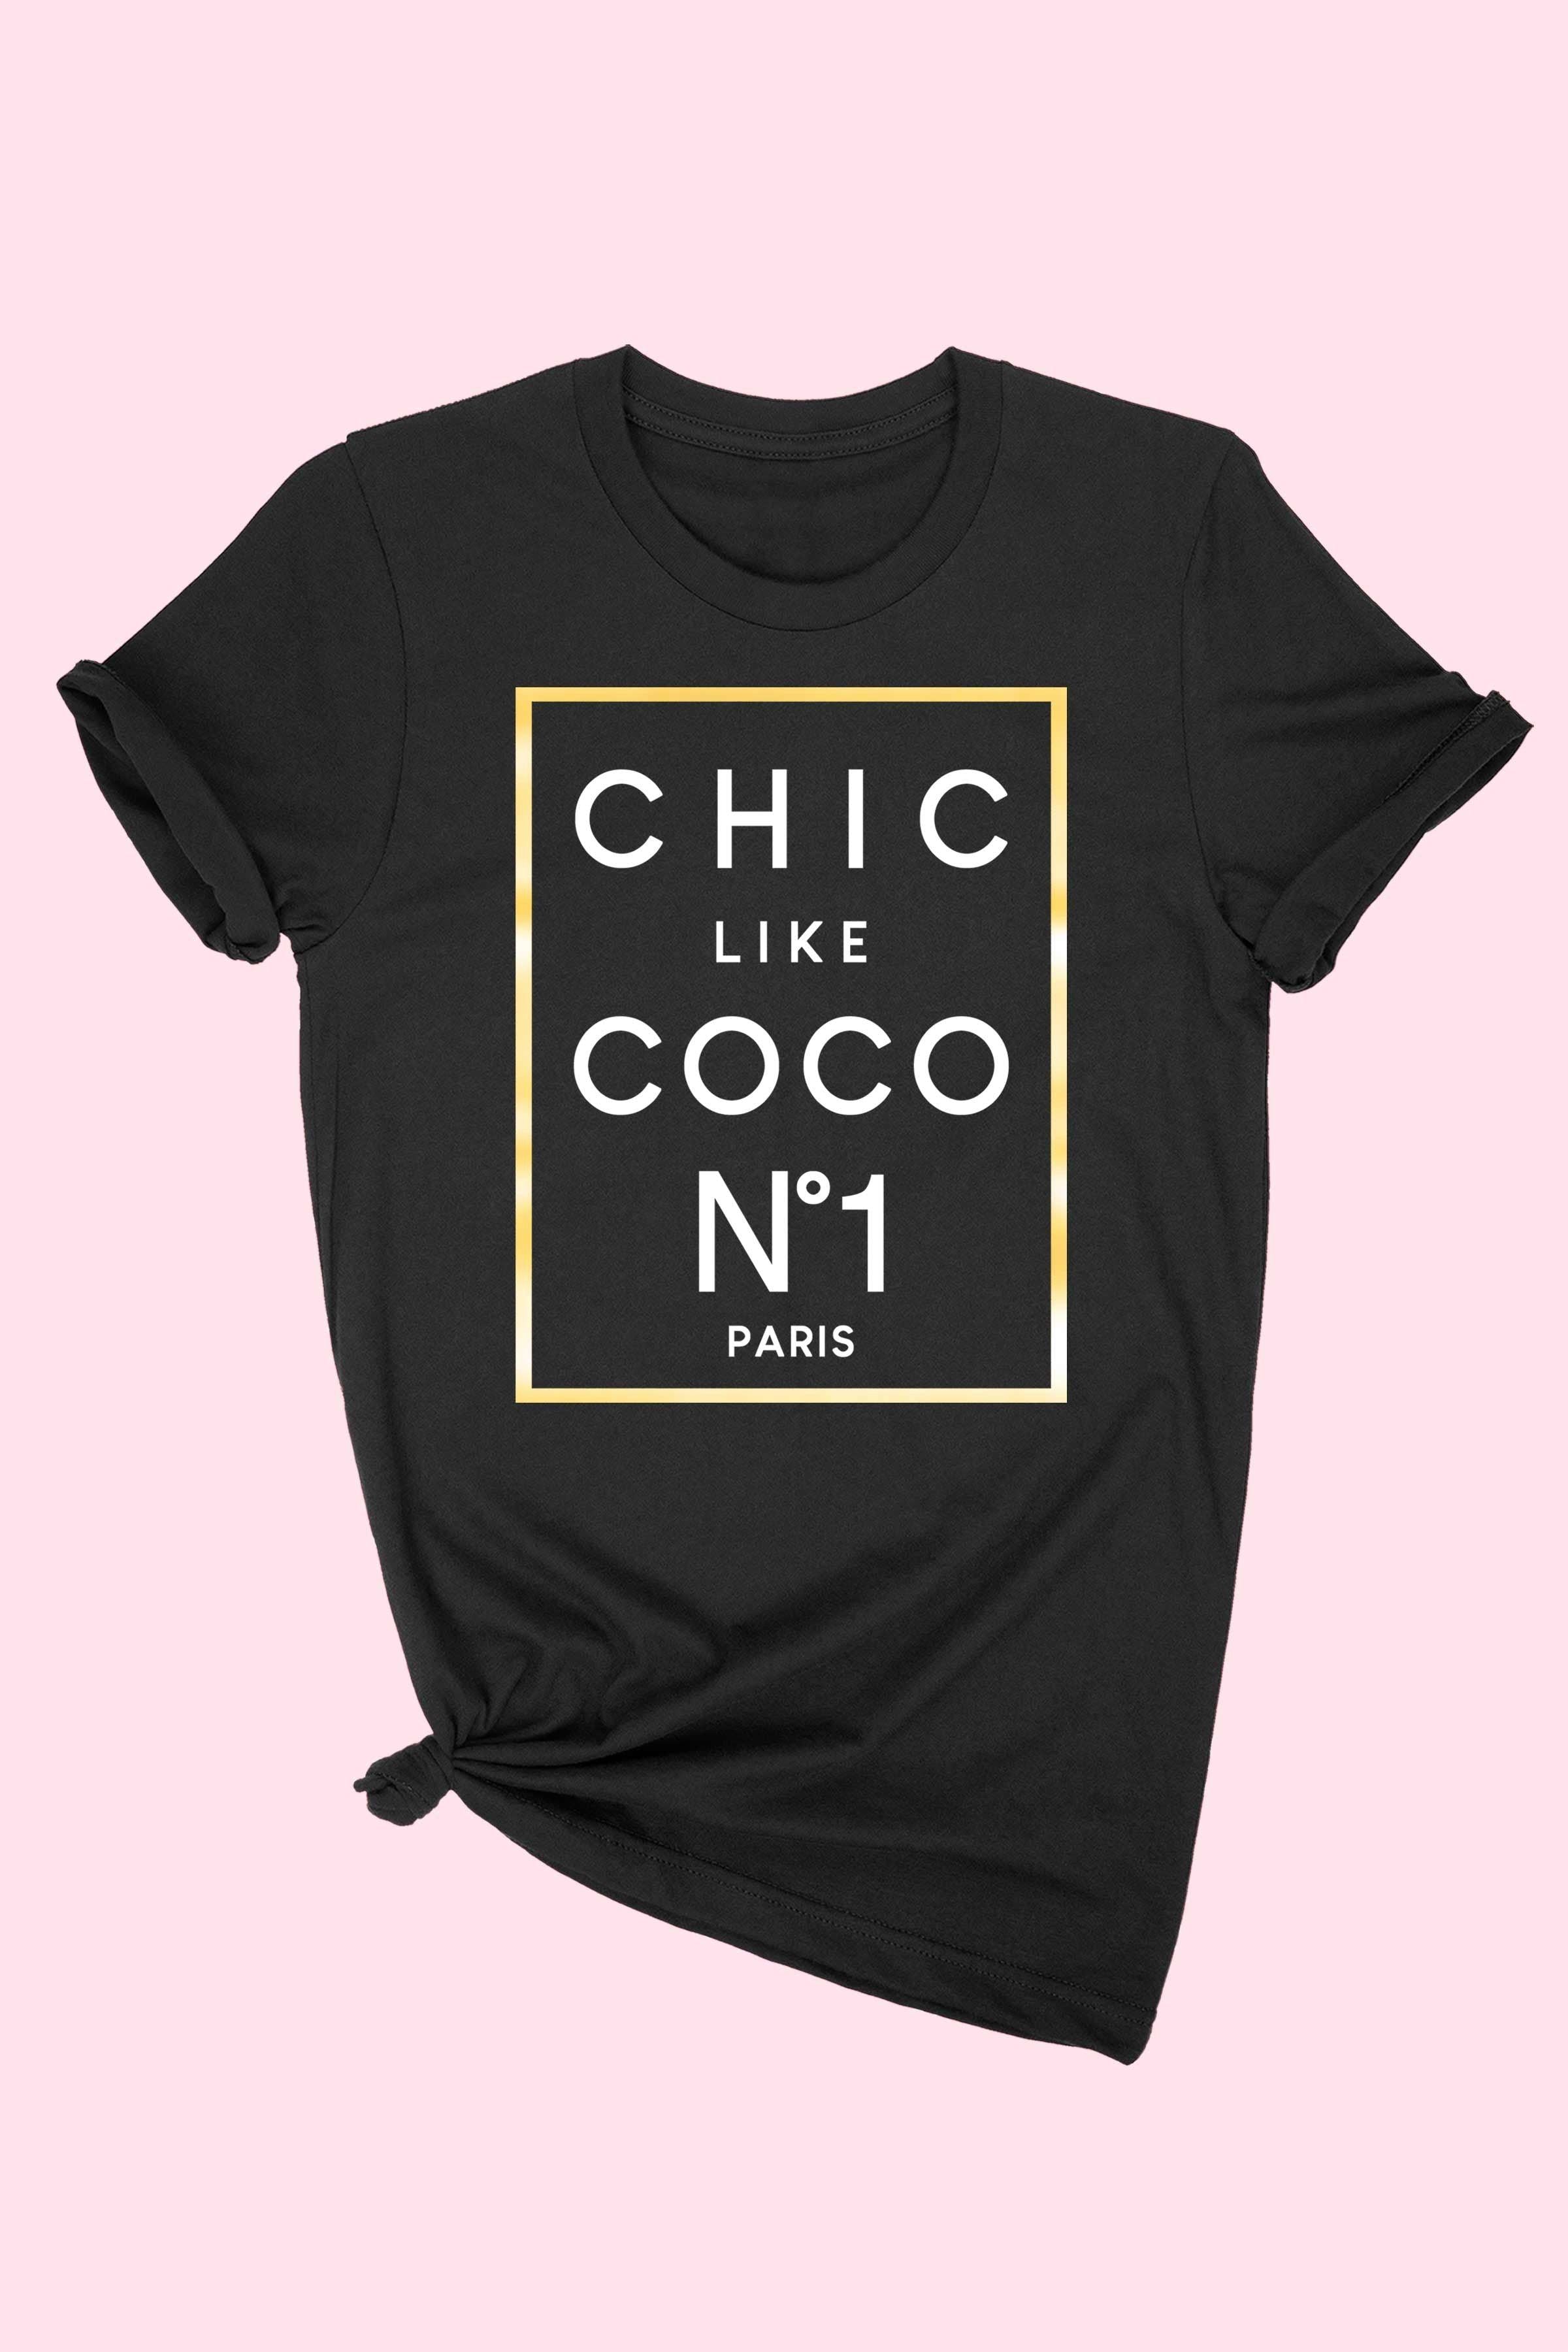 "Chic like Coco N1" Graphic Tee - Mint Leafe Boutique 